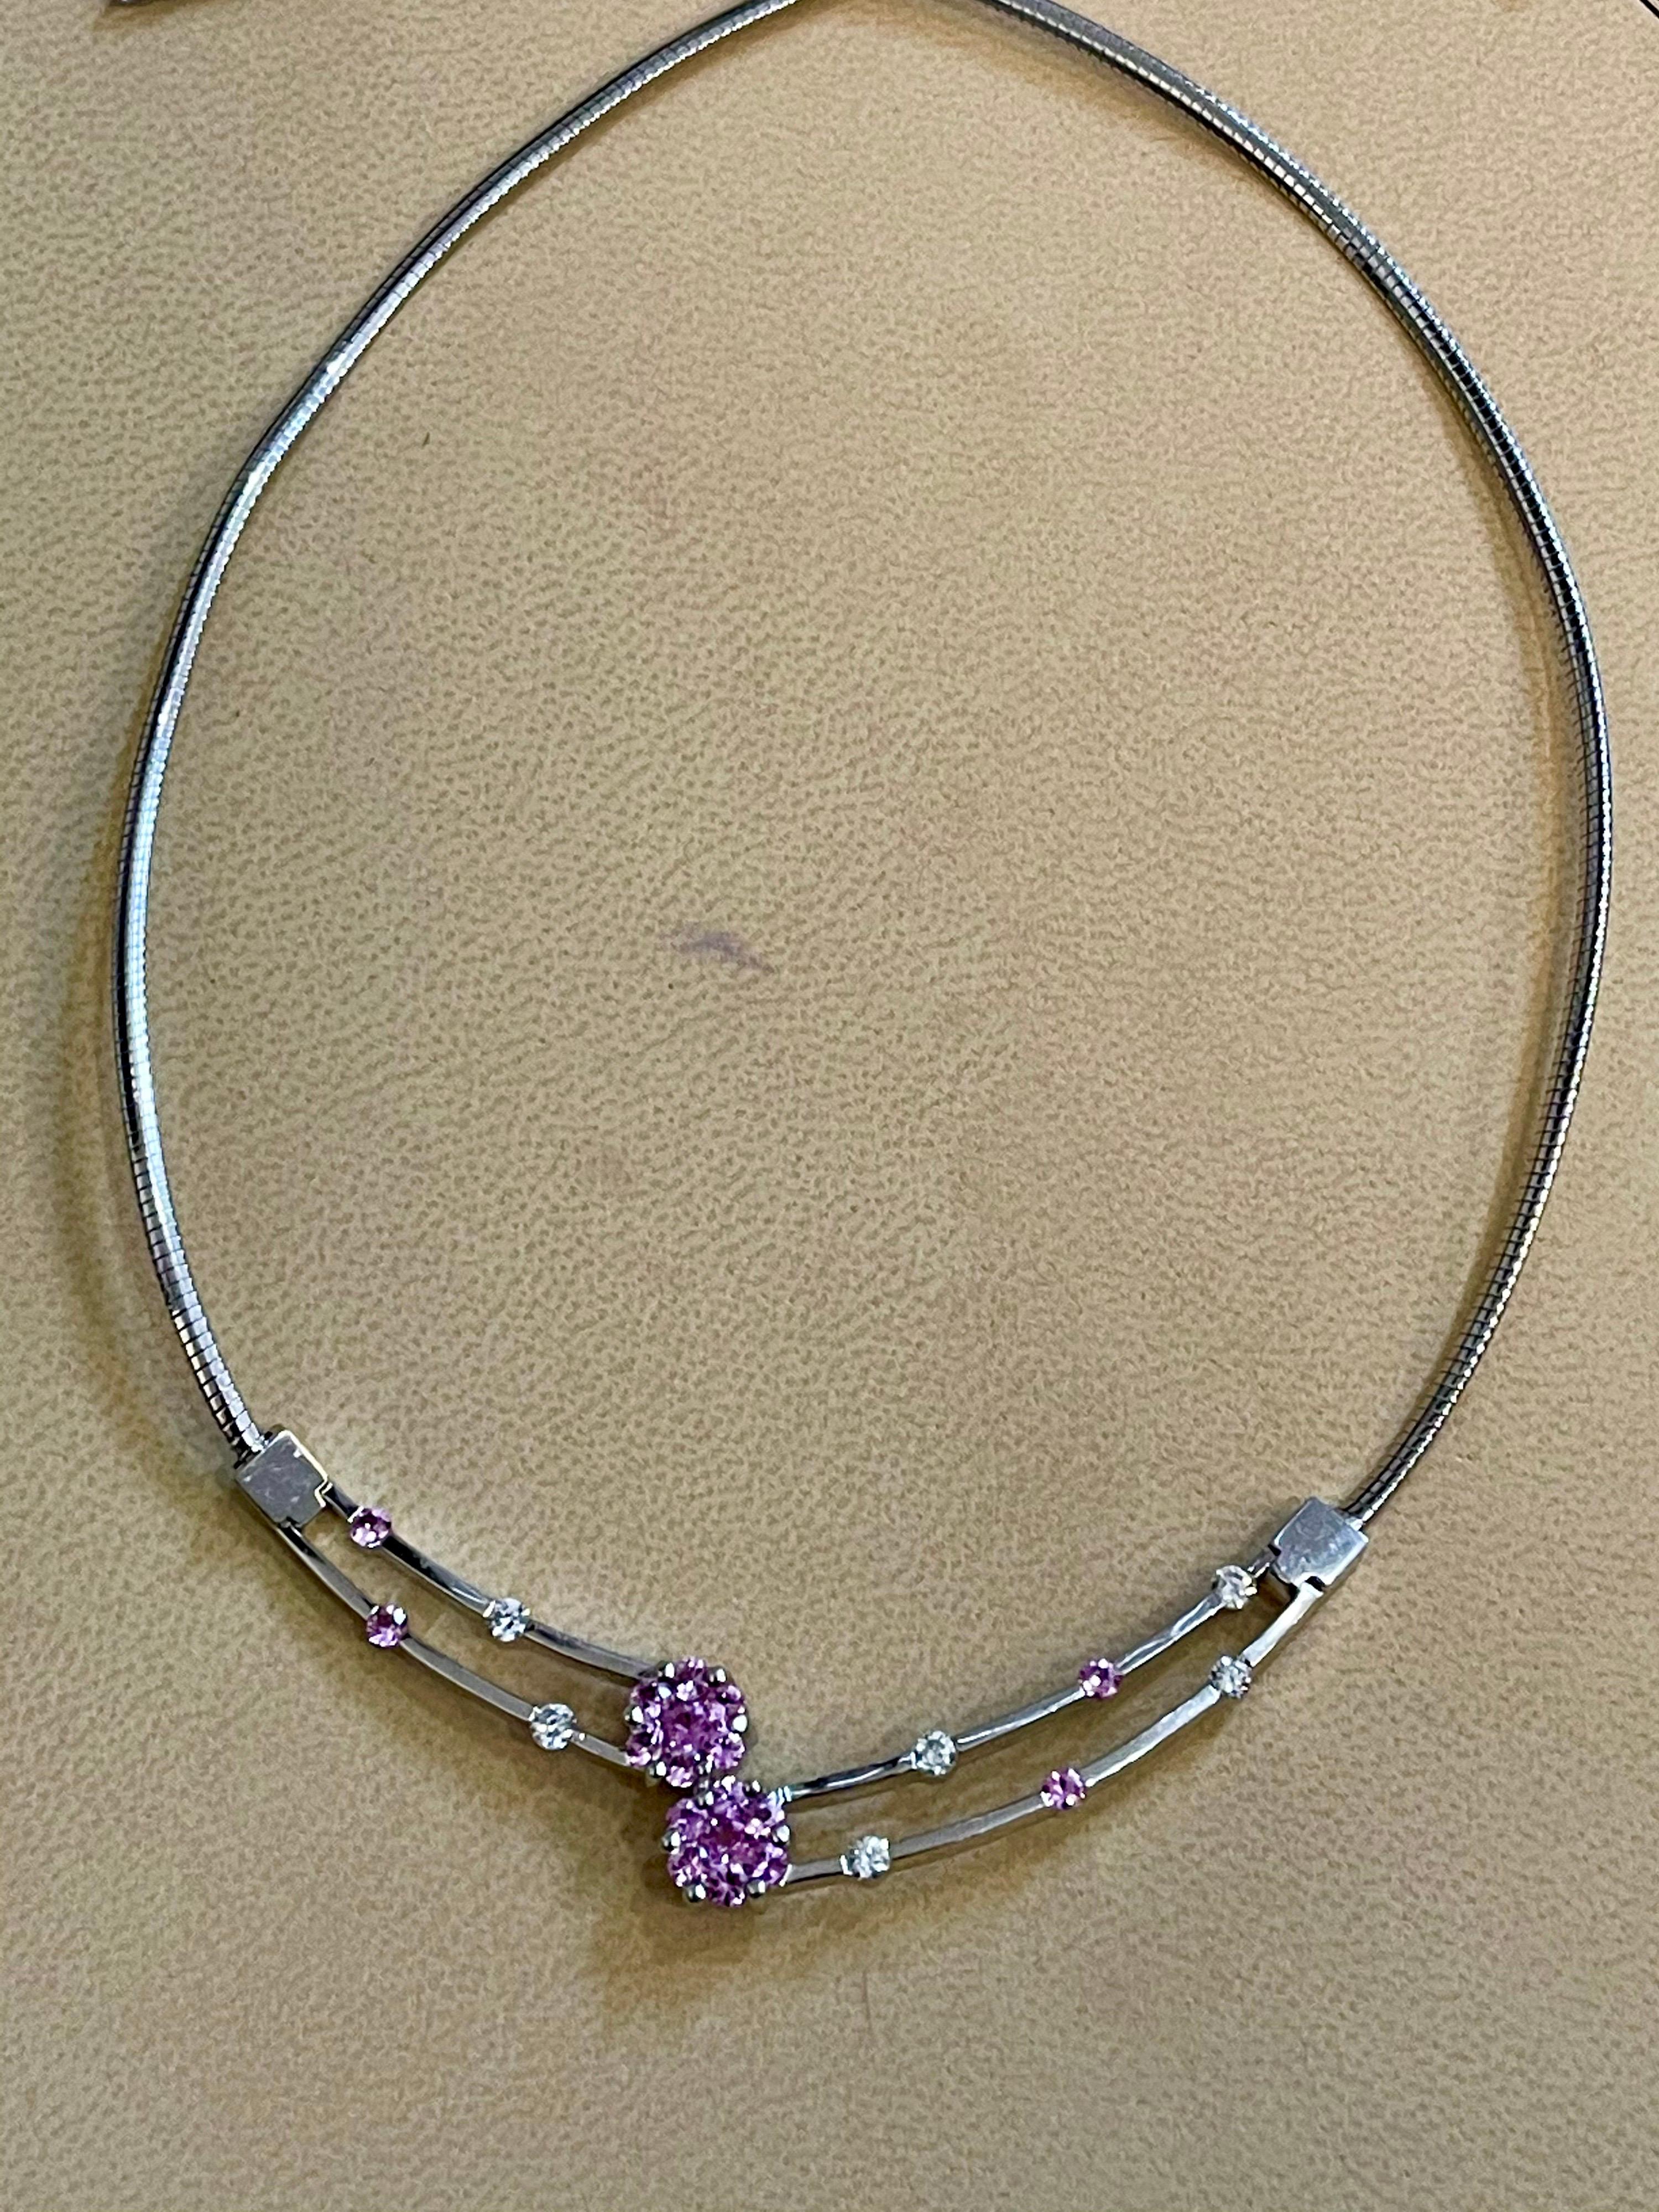 14 Karat White Gold Omega Necklace with Pink Sapphire and Diamonds, Italy For Sale 3